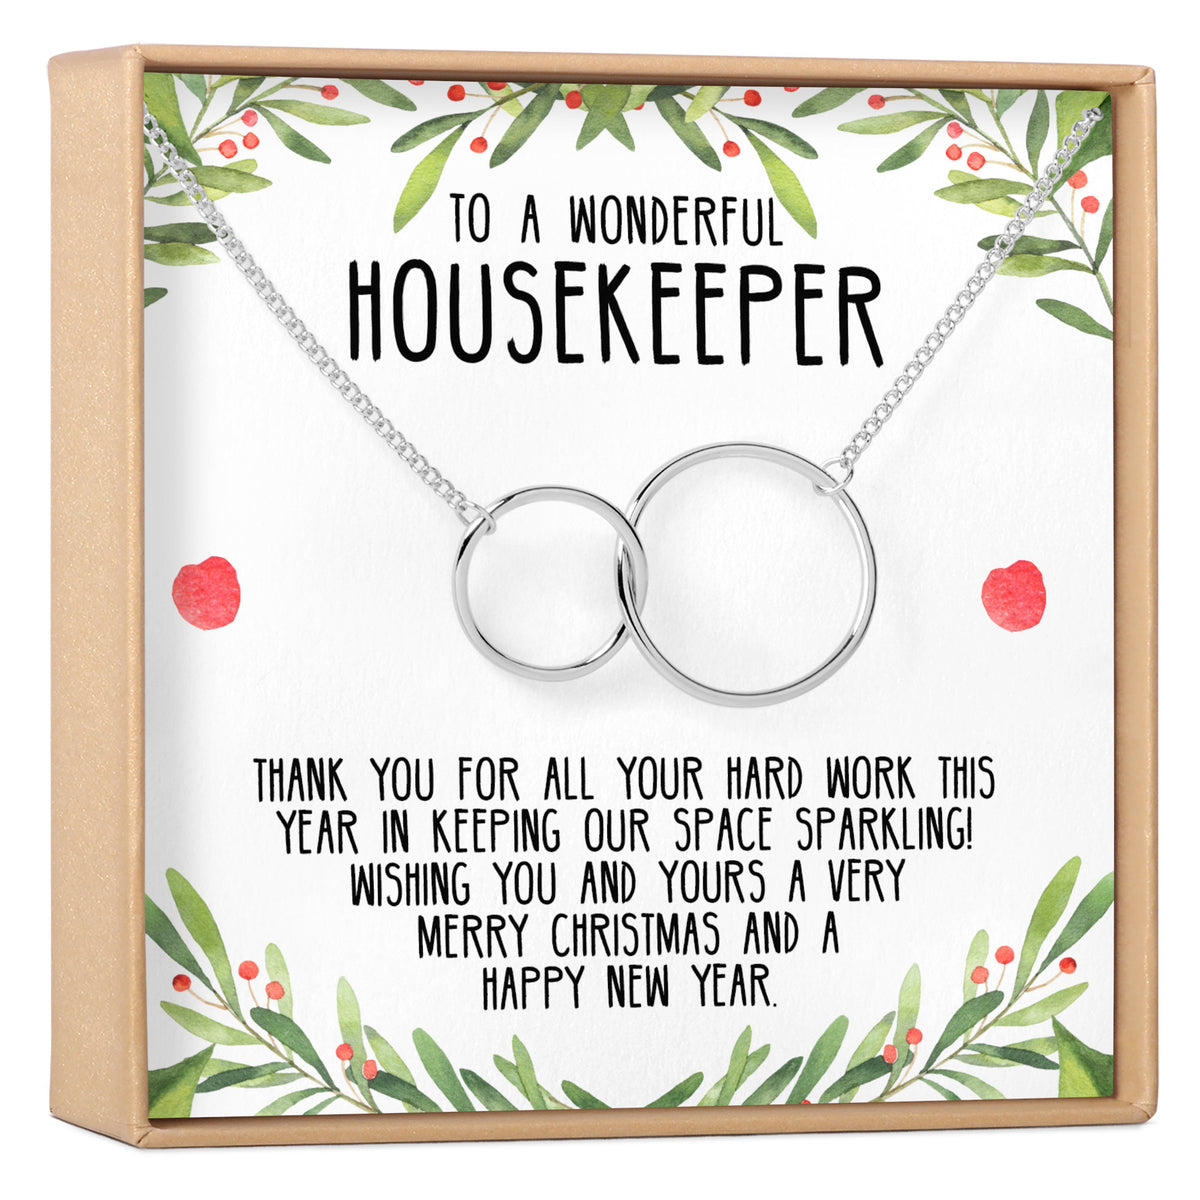 5 Holiday Gifts for Cleaners to Show Appreciation - Taskbird